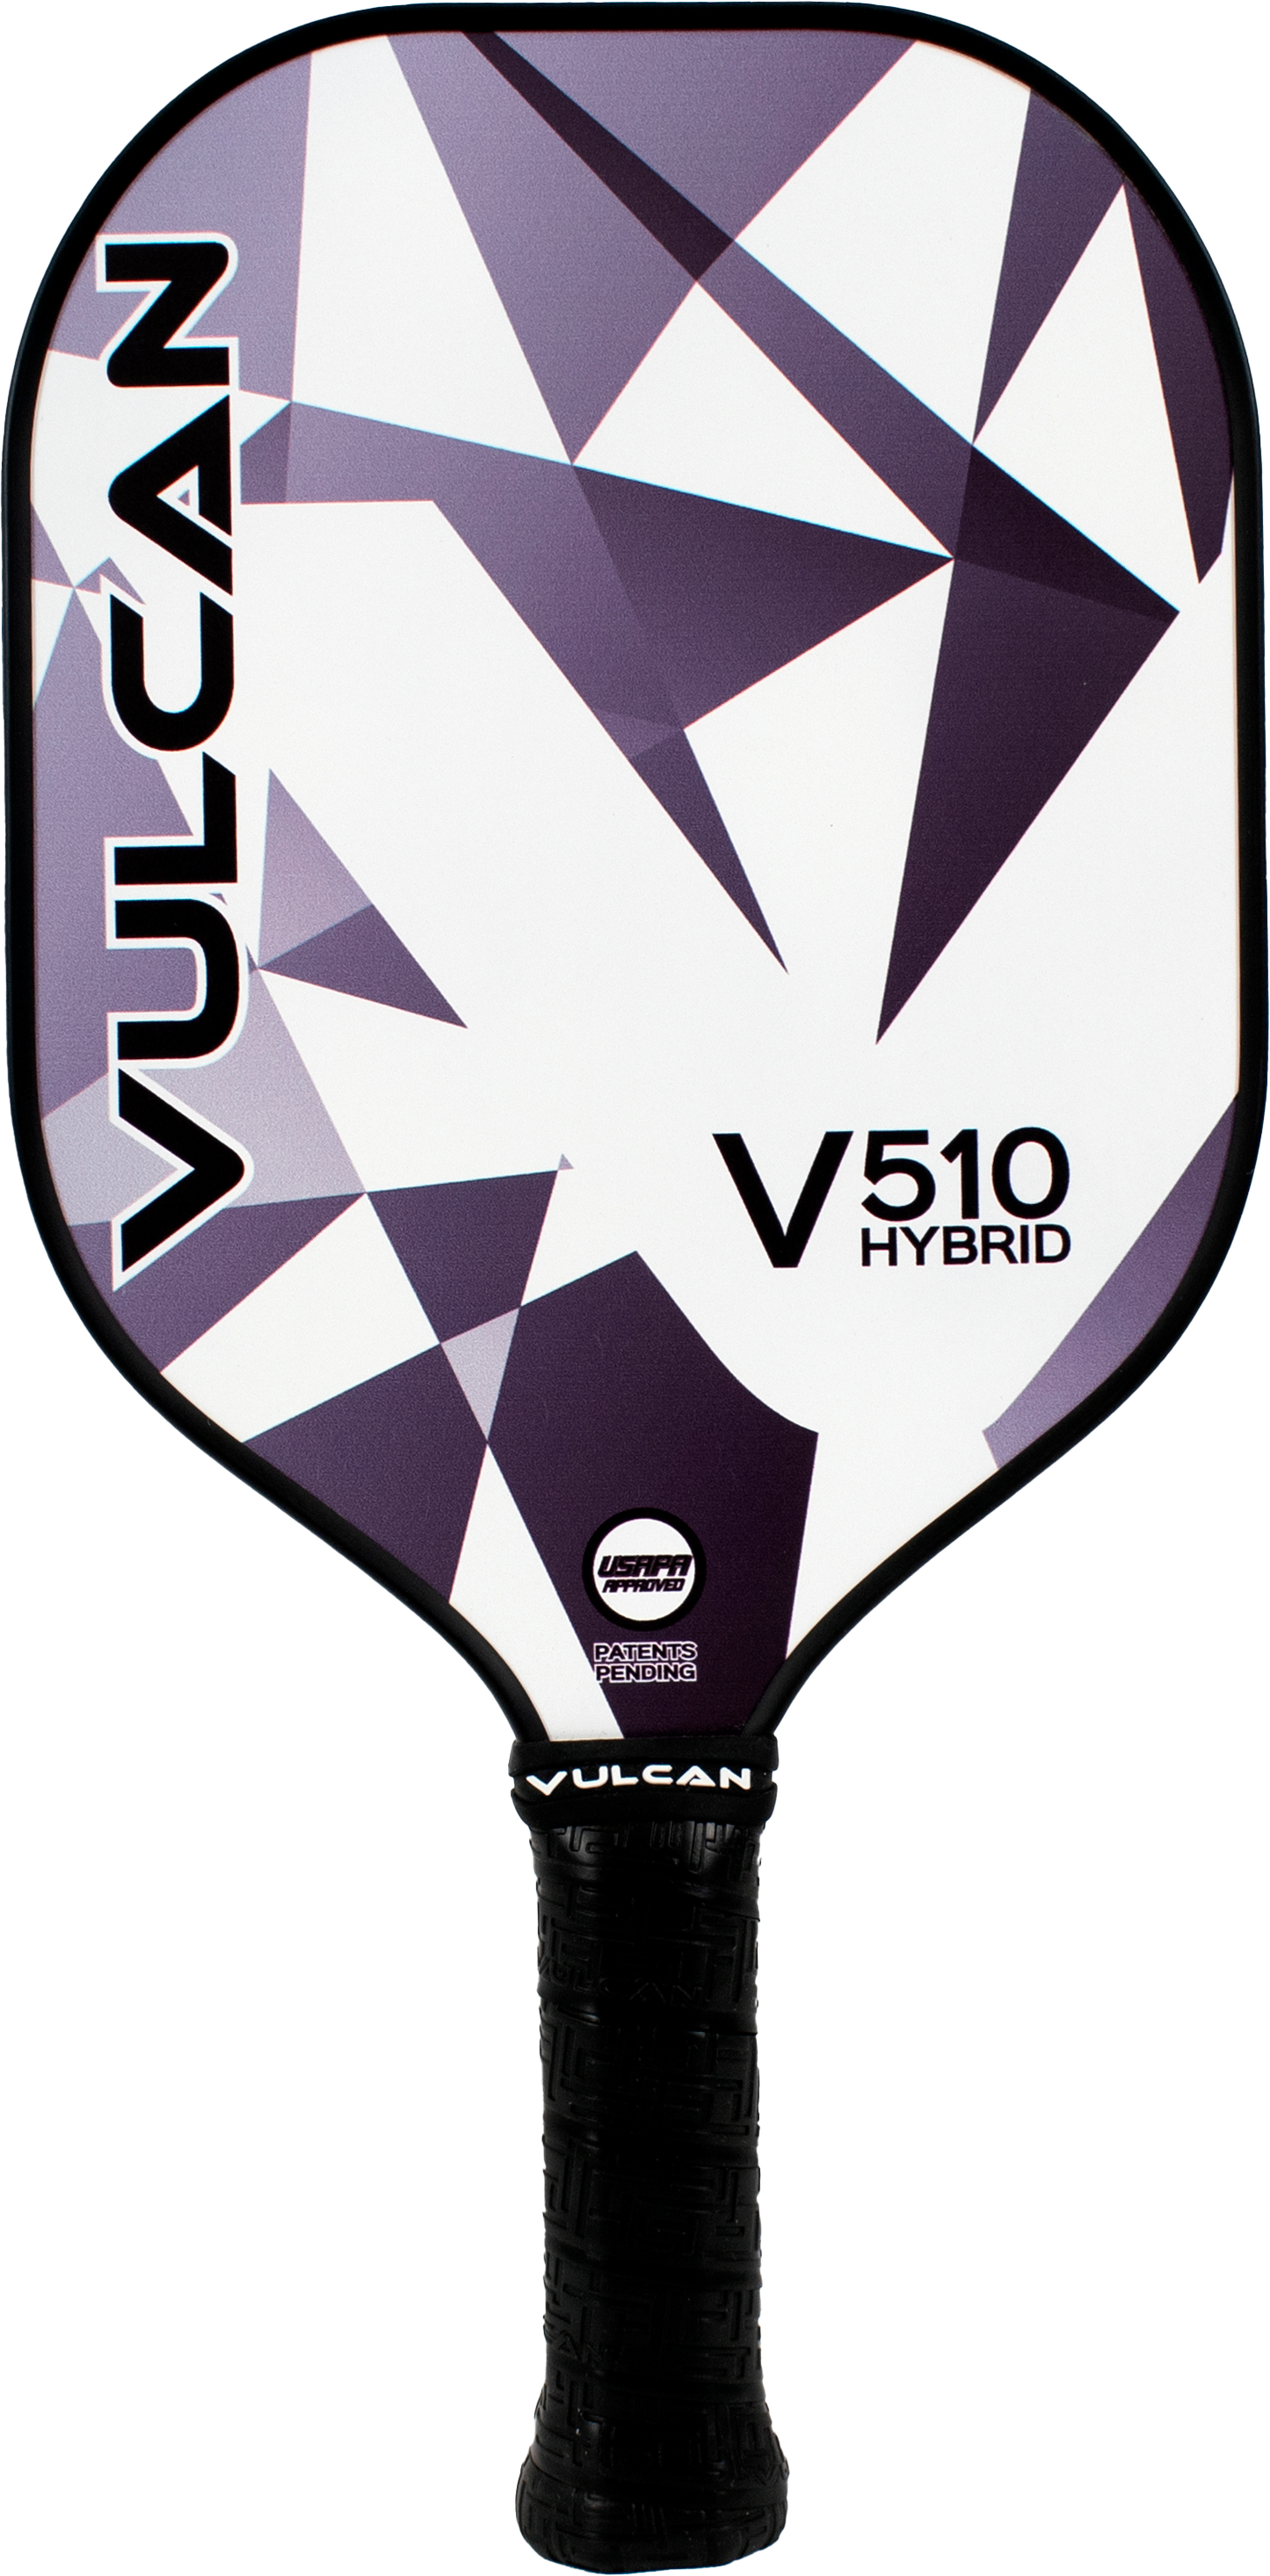 The Vulcan V510 Hybrid Pickleball Paddle by Vulcan is shown on a white background.